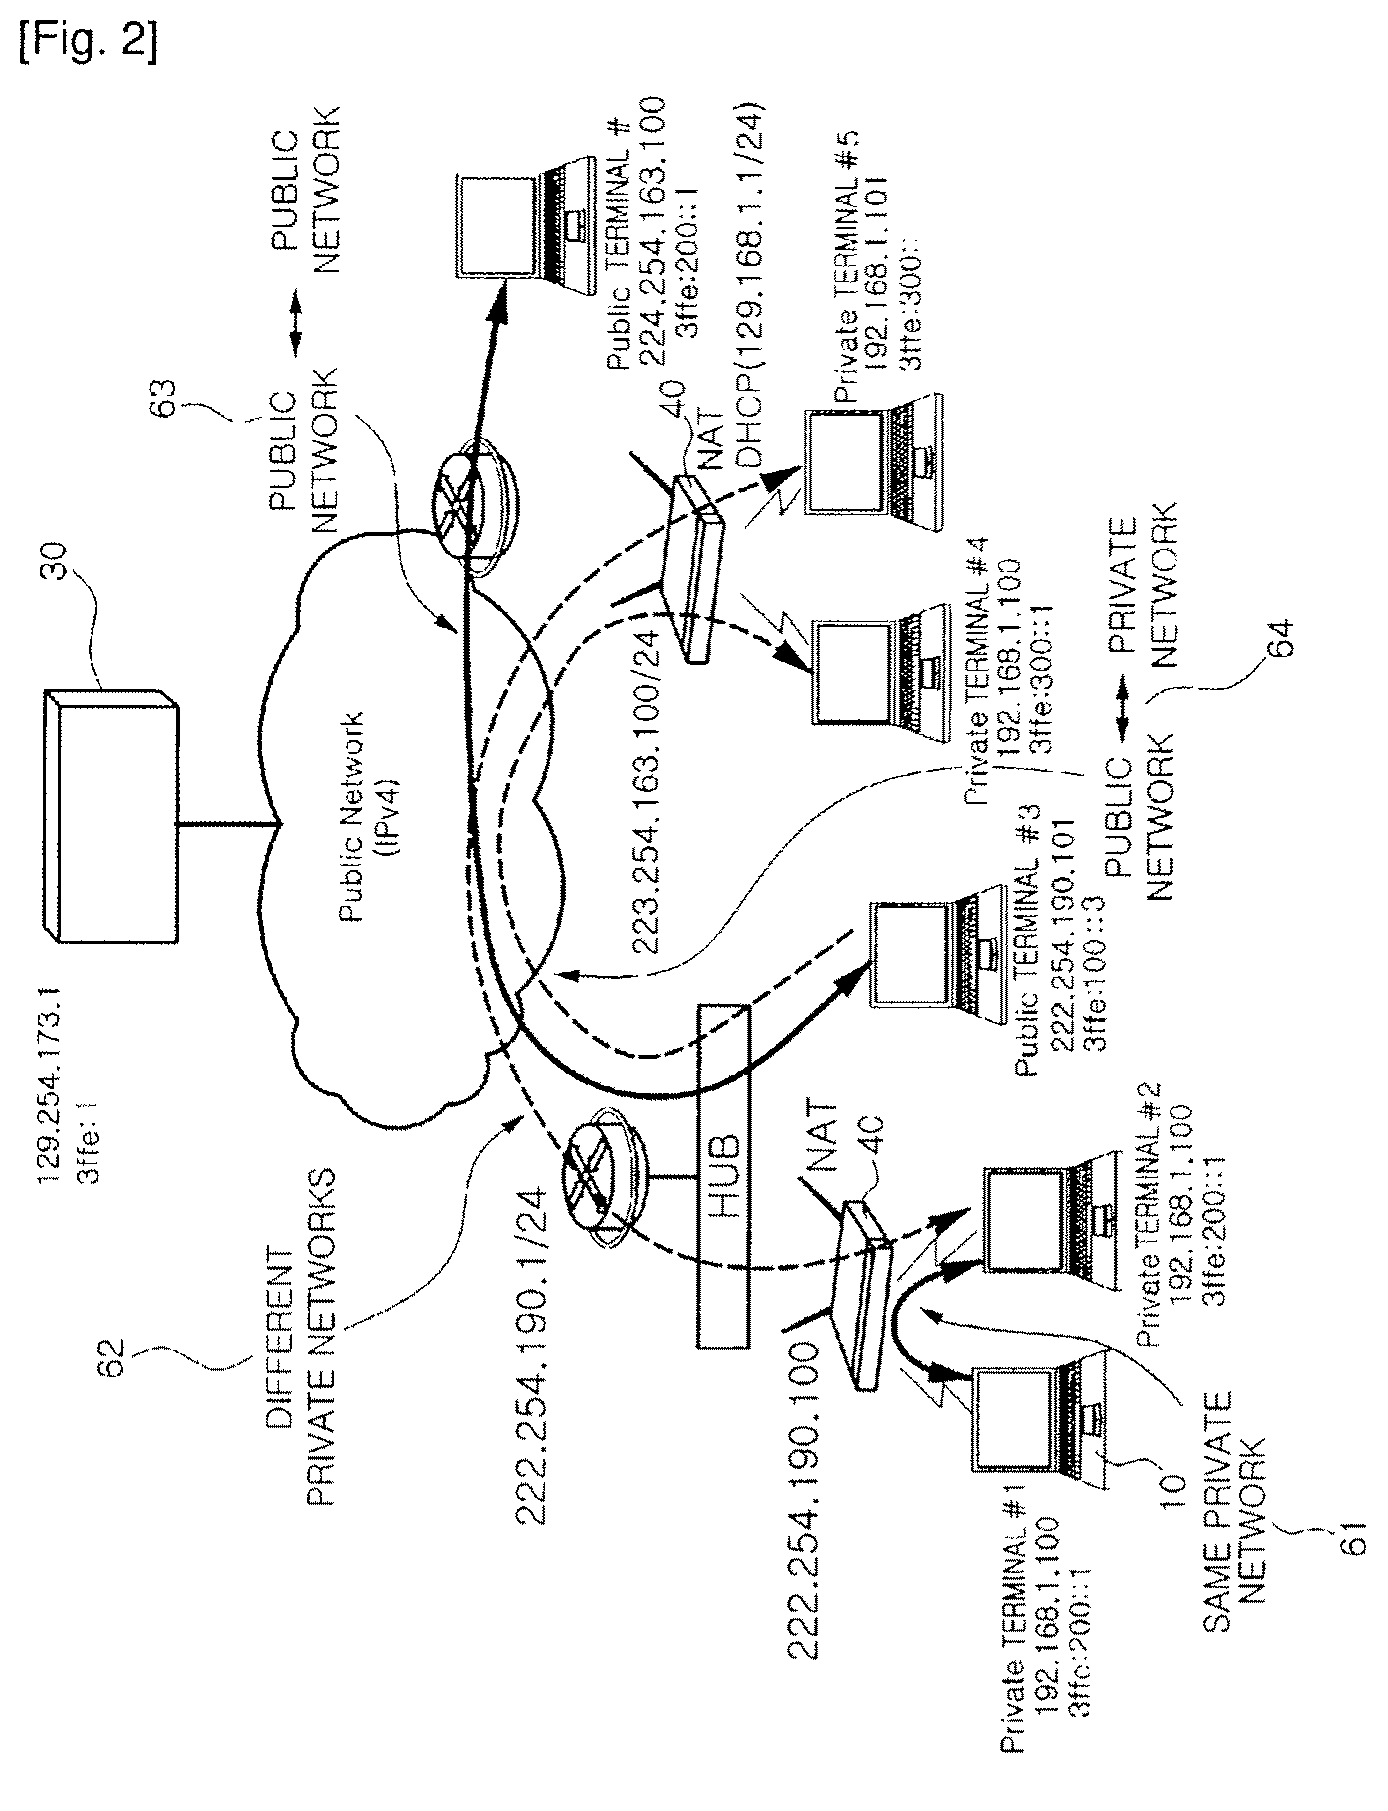 Method for configuring control tunnel and direct tunnel in ipv4 network-based ipv6 service providing system